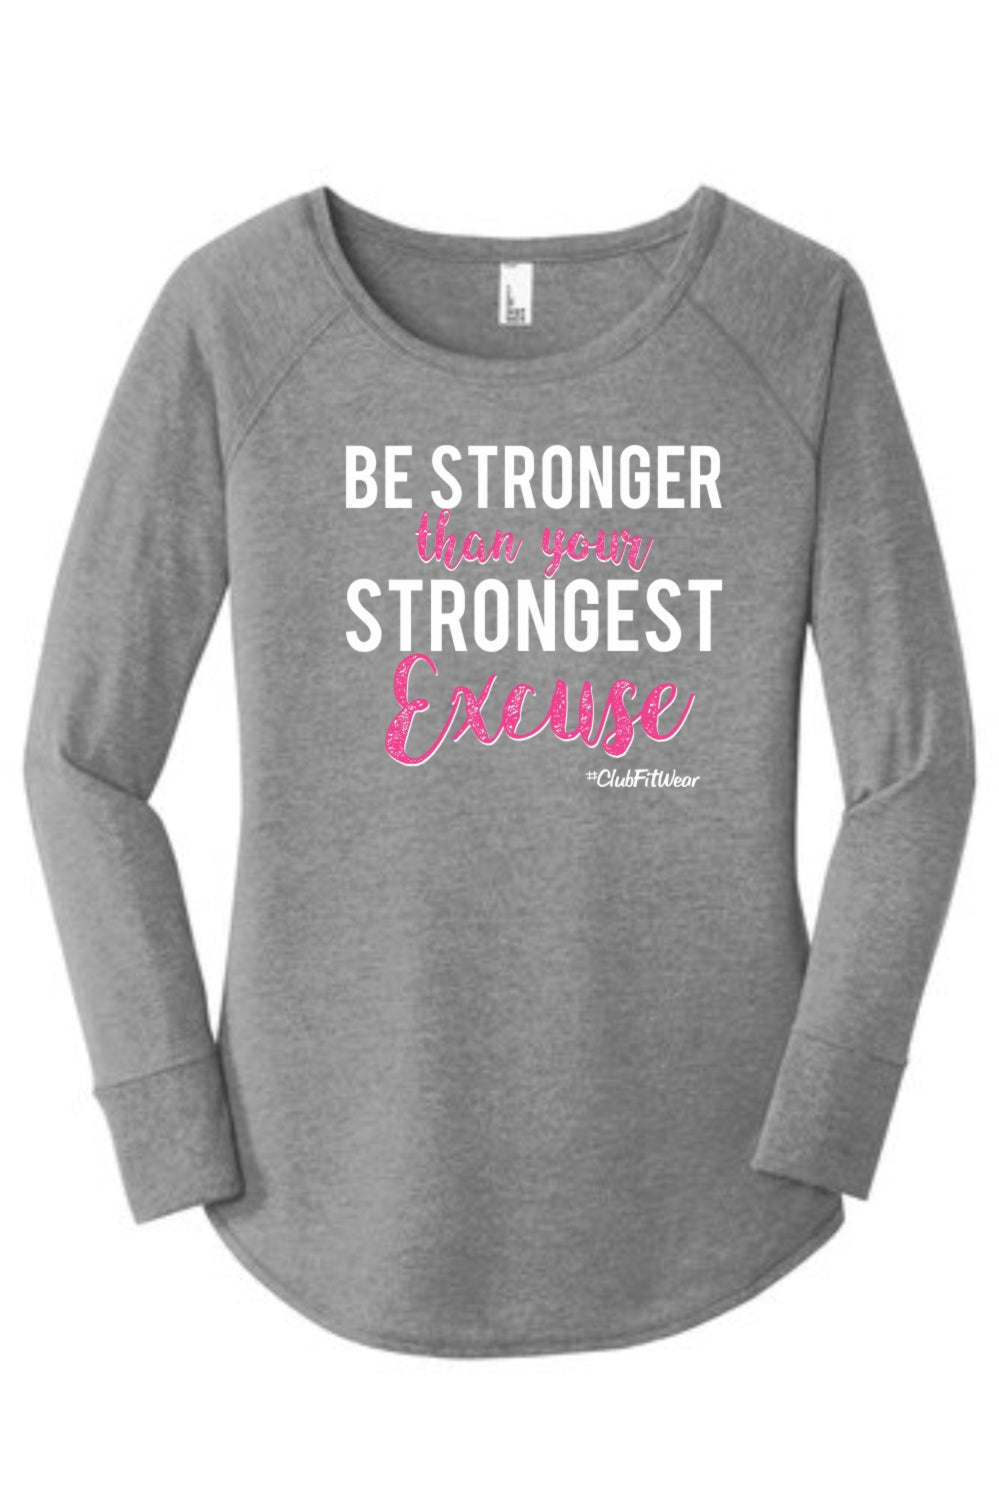 Be Stronger than your Strongest Excuse - Long Sleeve Tunic